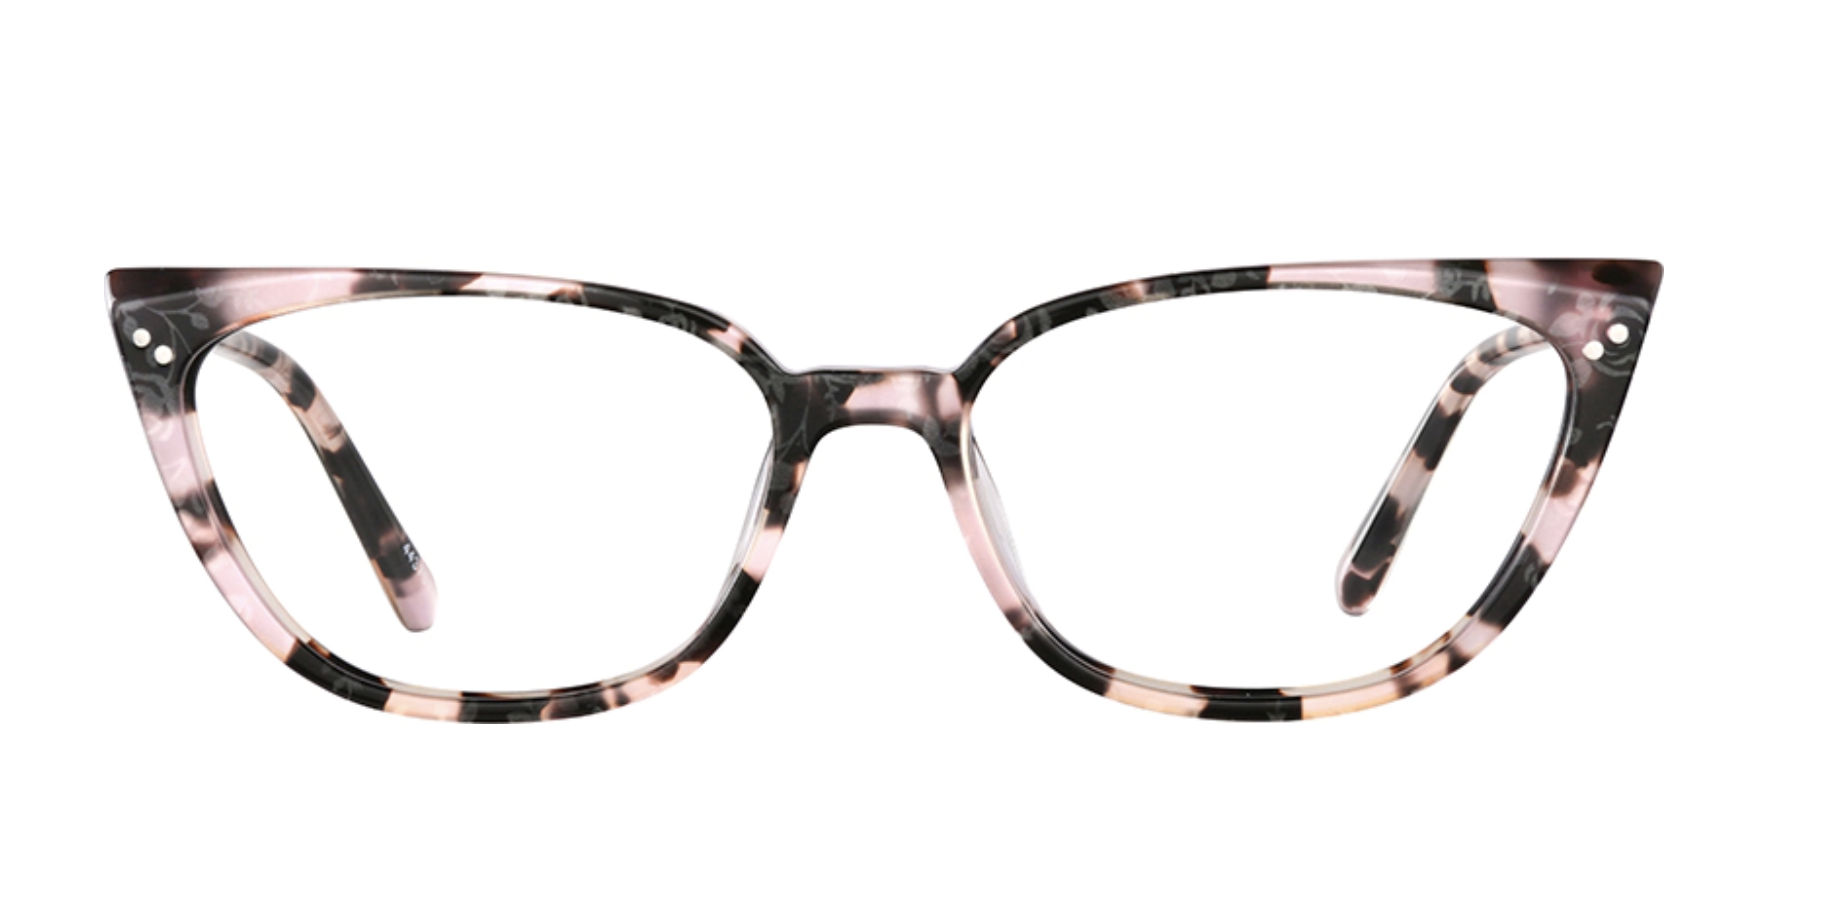 A pair of pink and black tortoise shell cat eye glasses 